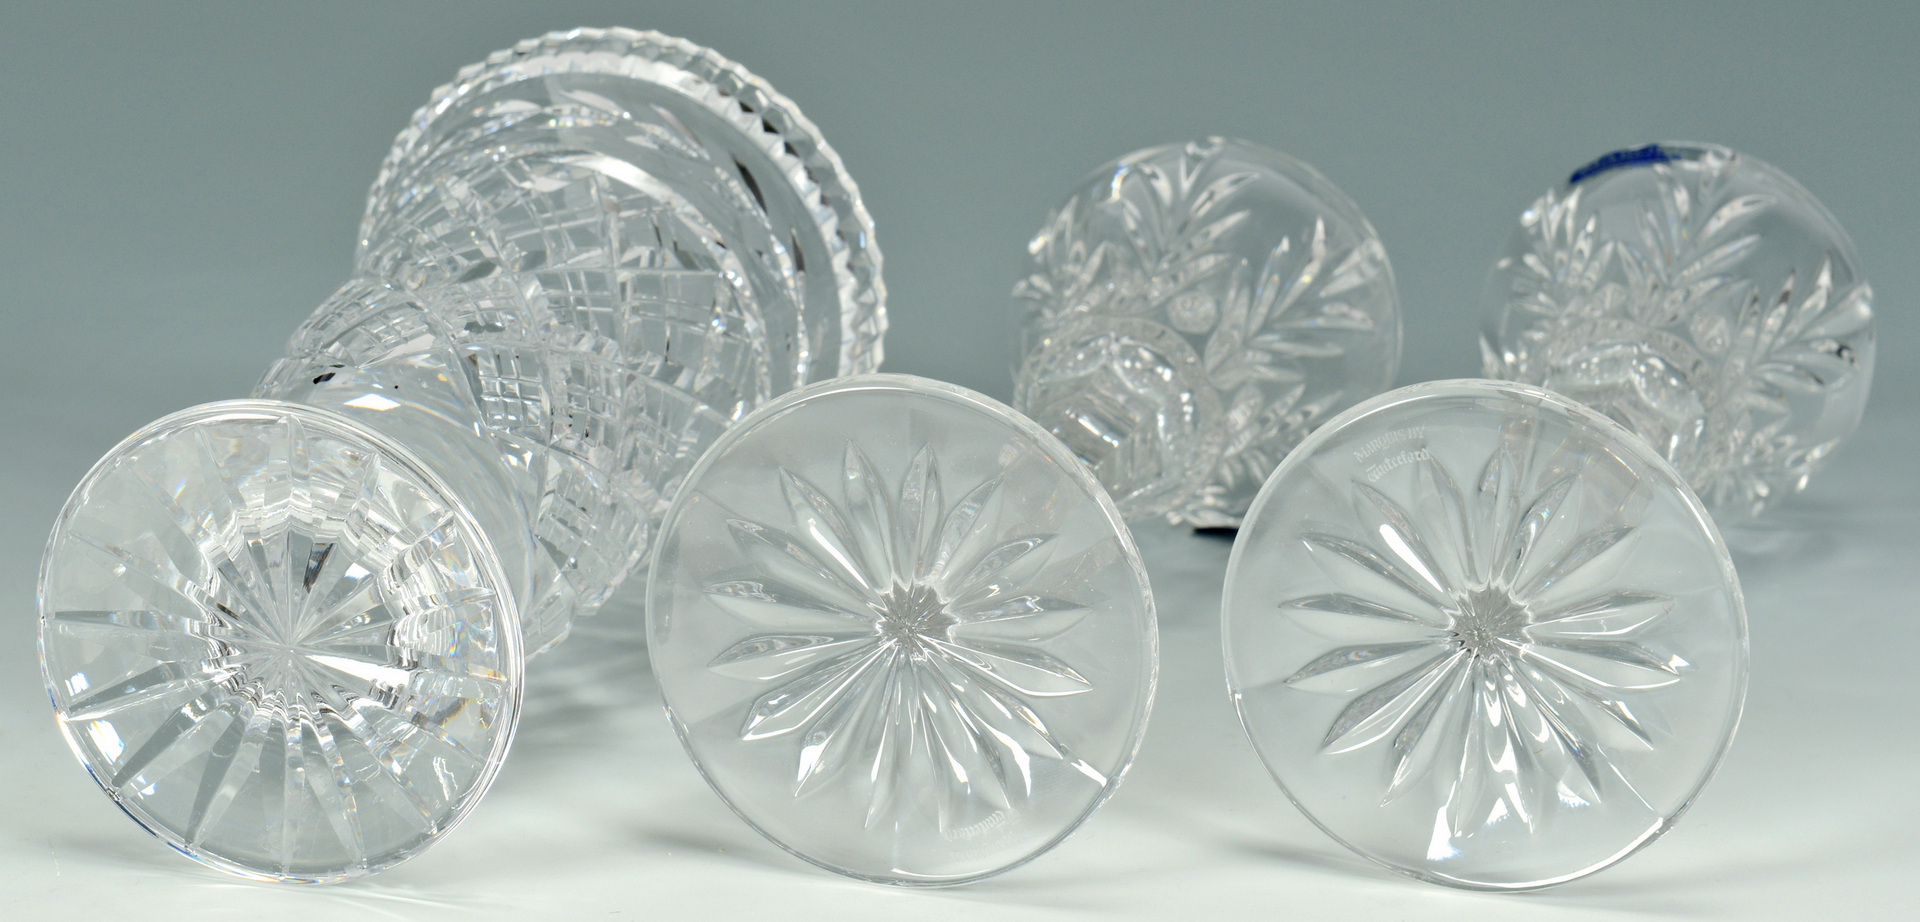 Lot 3088190: Grouping of Waterford Cut Crystal Items